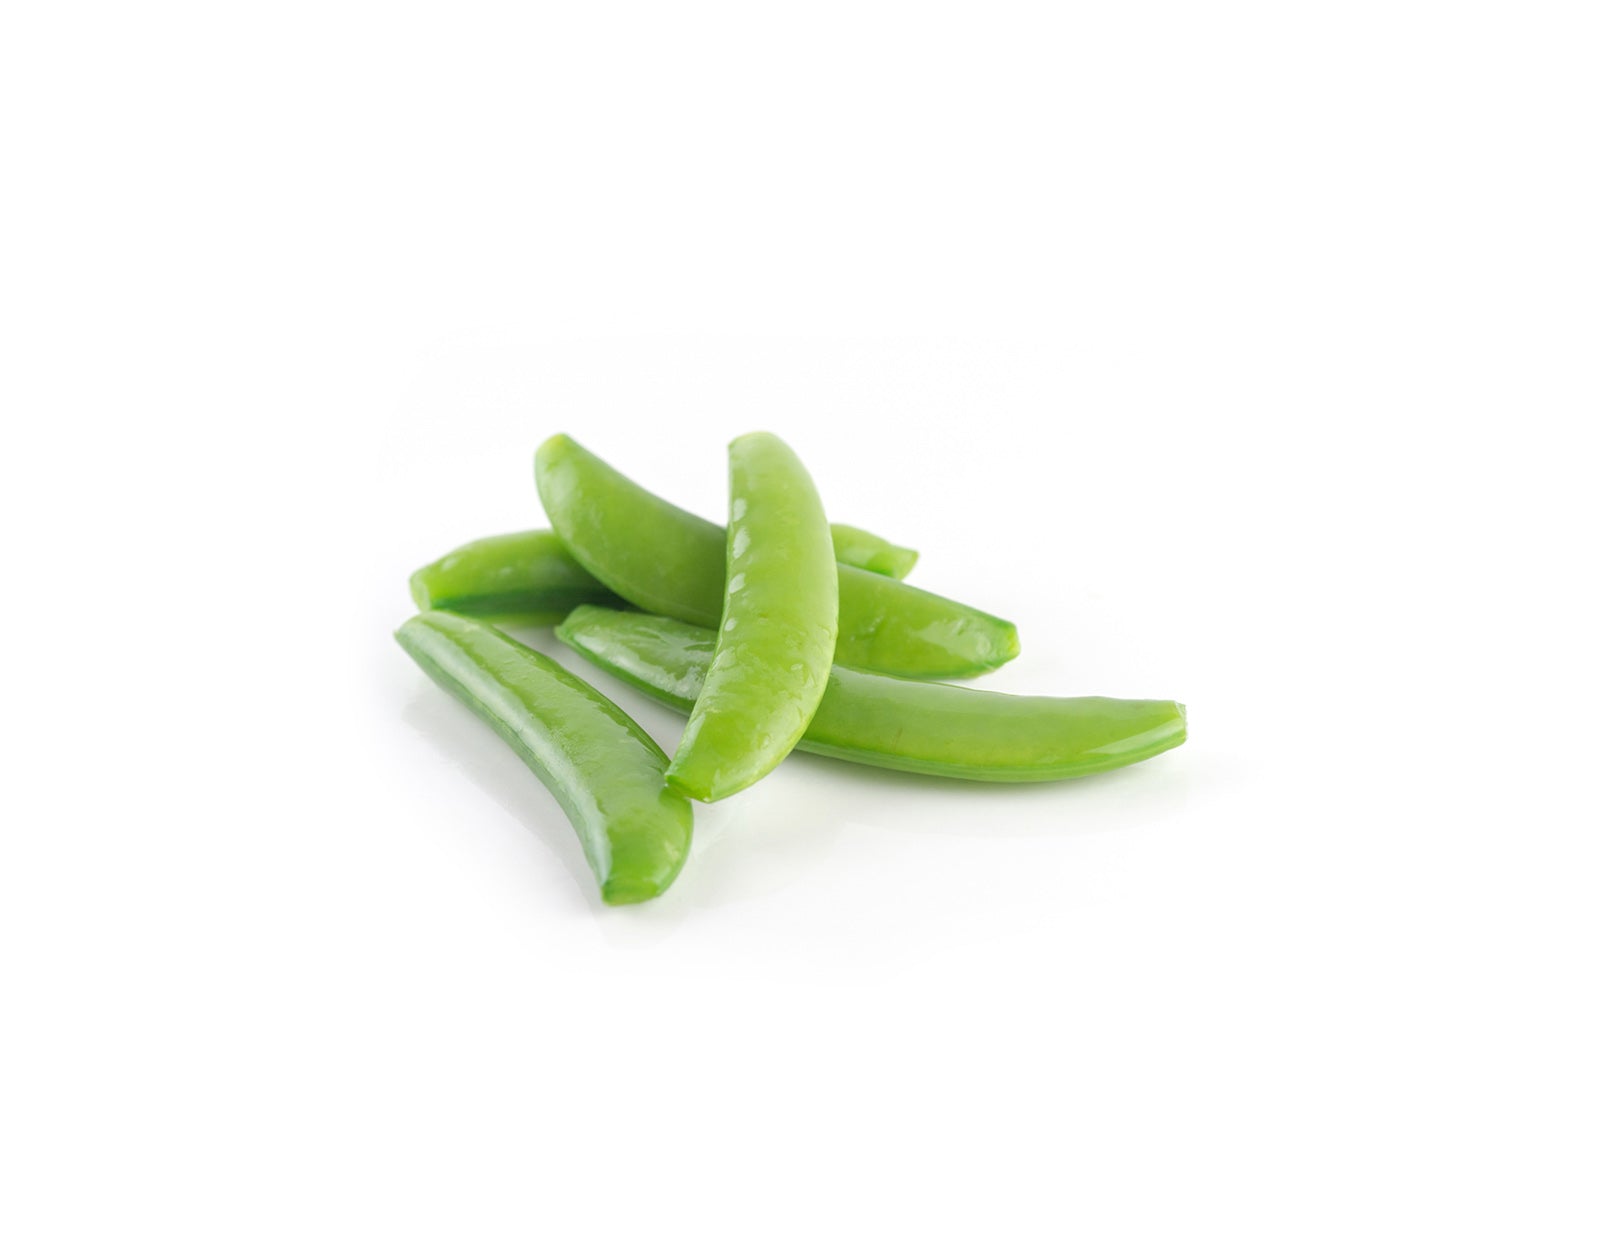 Fresh Veggies SG Fresh Vegetables Online Delivery in Singapore-Snow Pea or Chinese Pea Pods, 雪豆, 豌豆